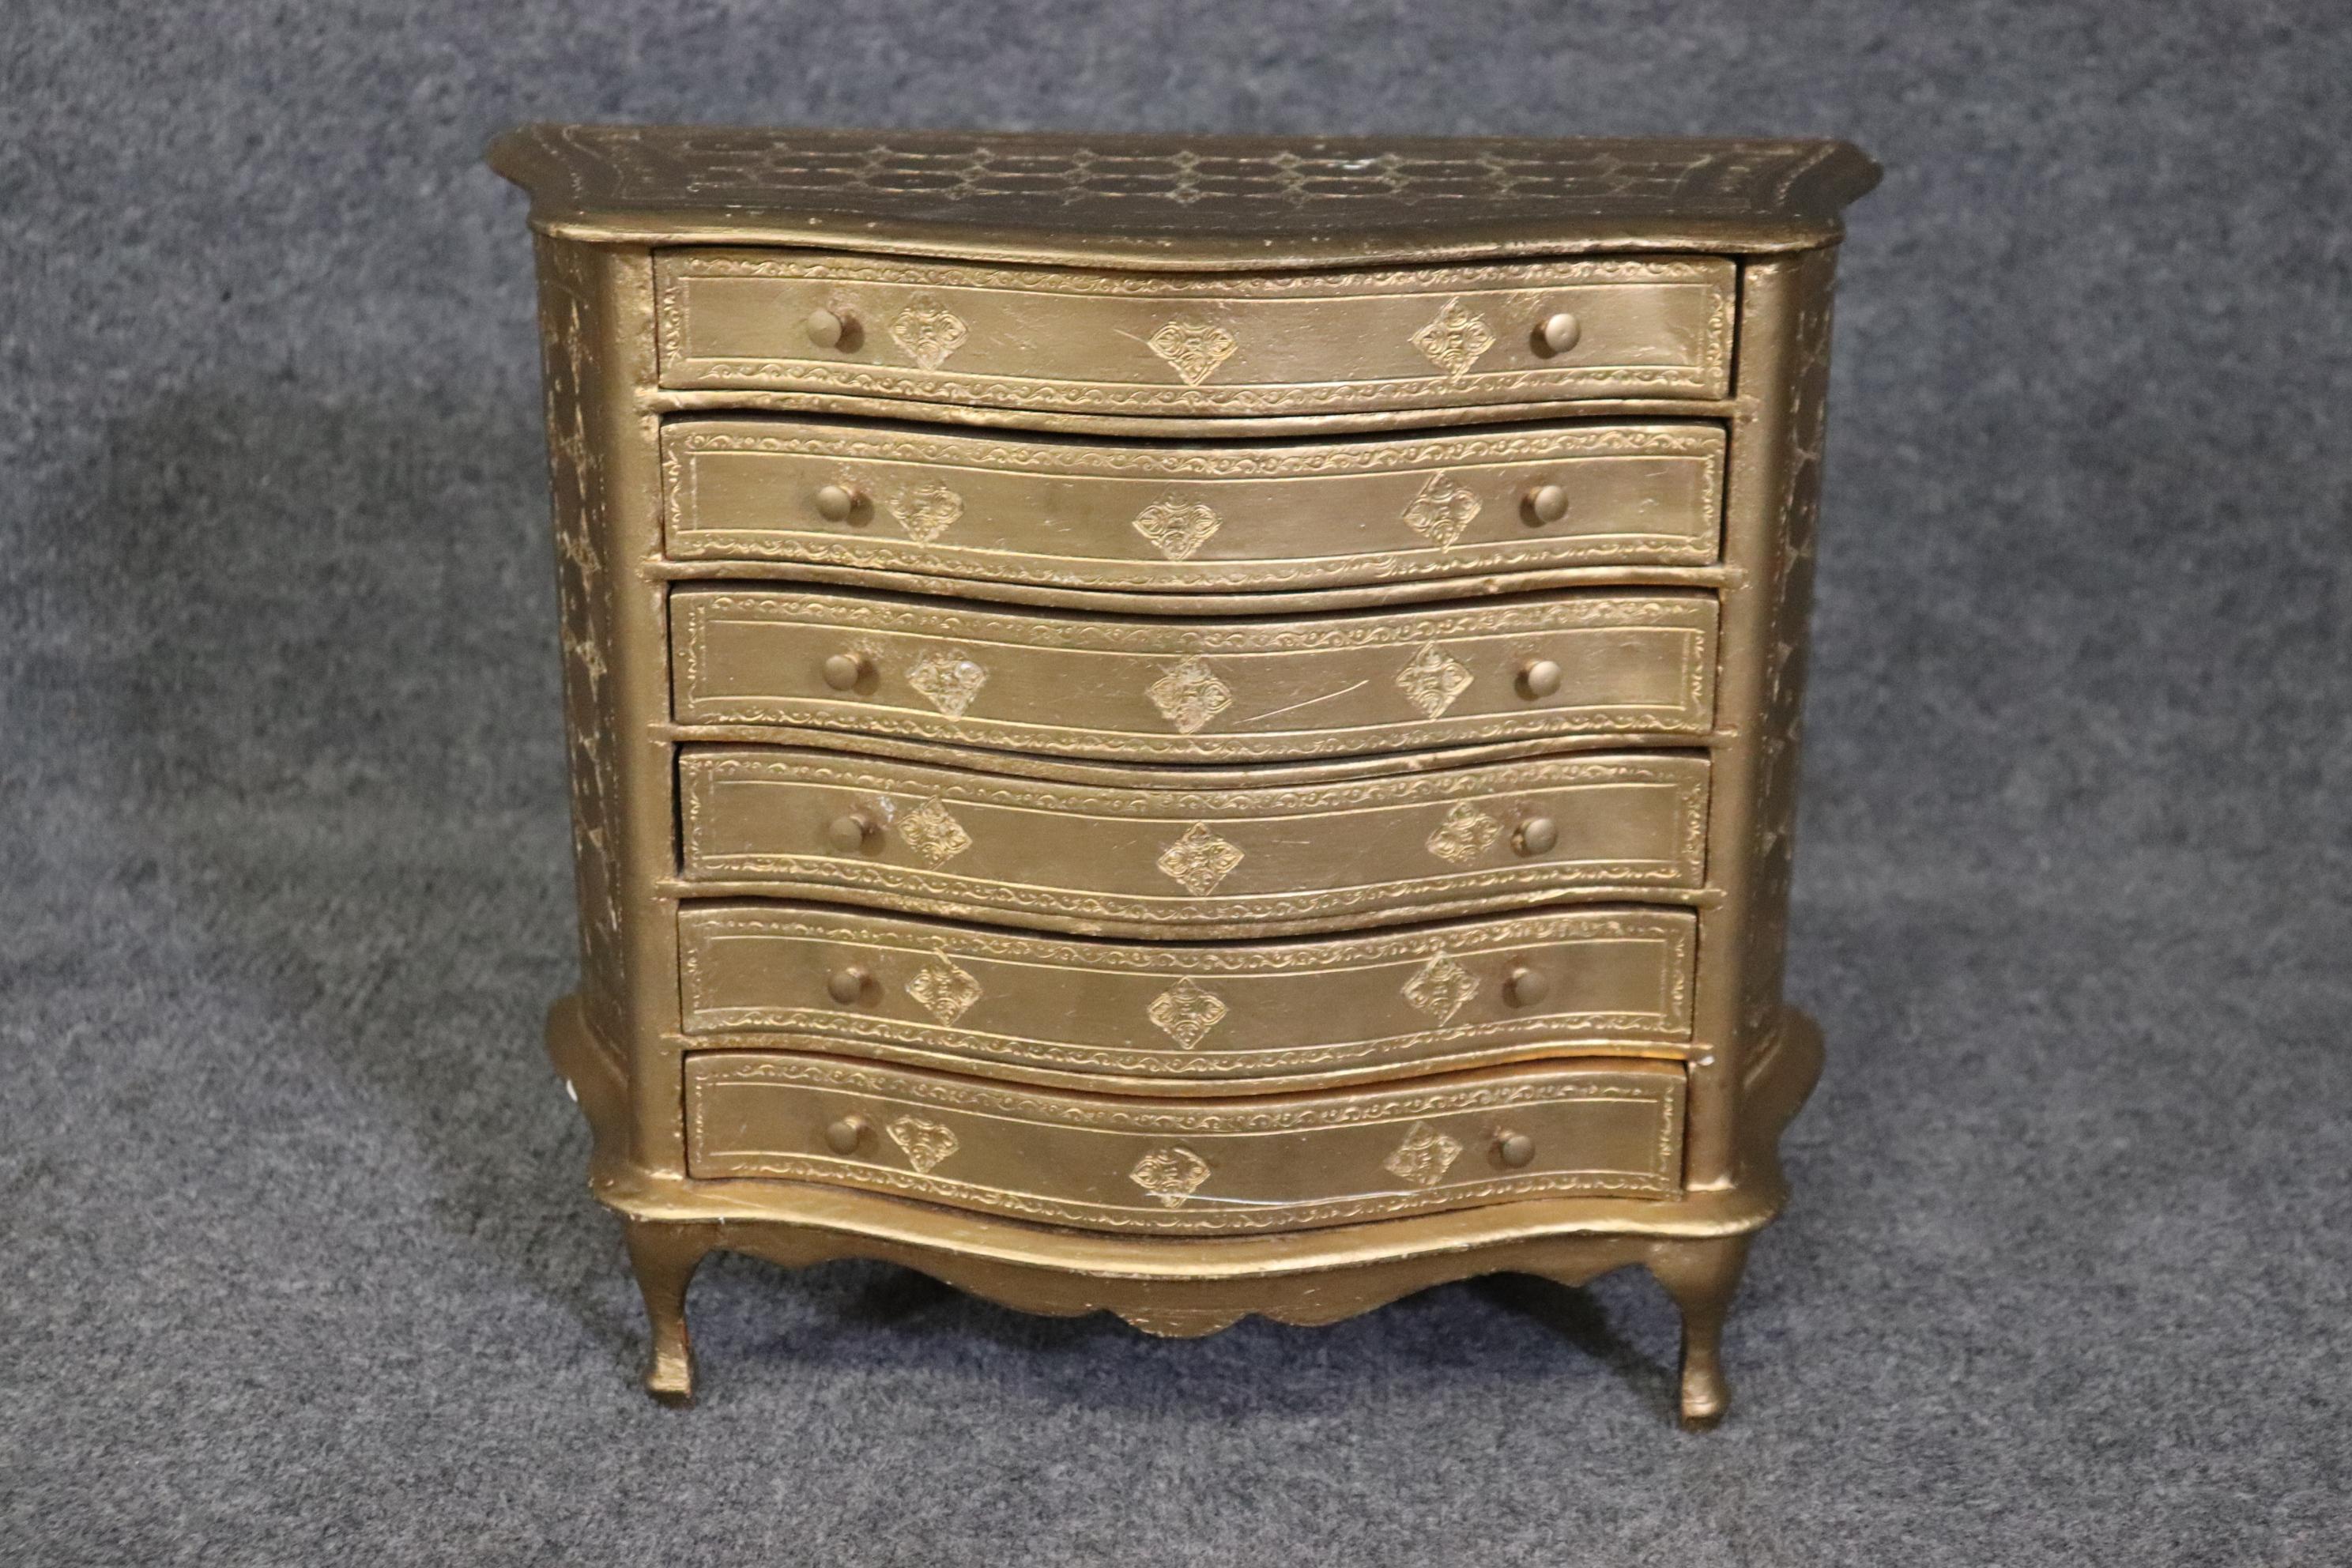 Dimensions - H: 14in W: 16in D: 7 1/4in 

This Gold Antique Italian Florentine Jewelry Box/Trinket Box is truly unique! This piece is made of the highest quality and will certainly add a sense of sophistication into your place of choosing! Each